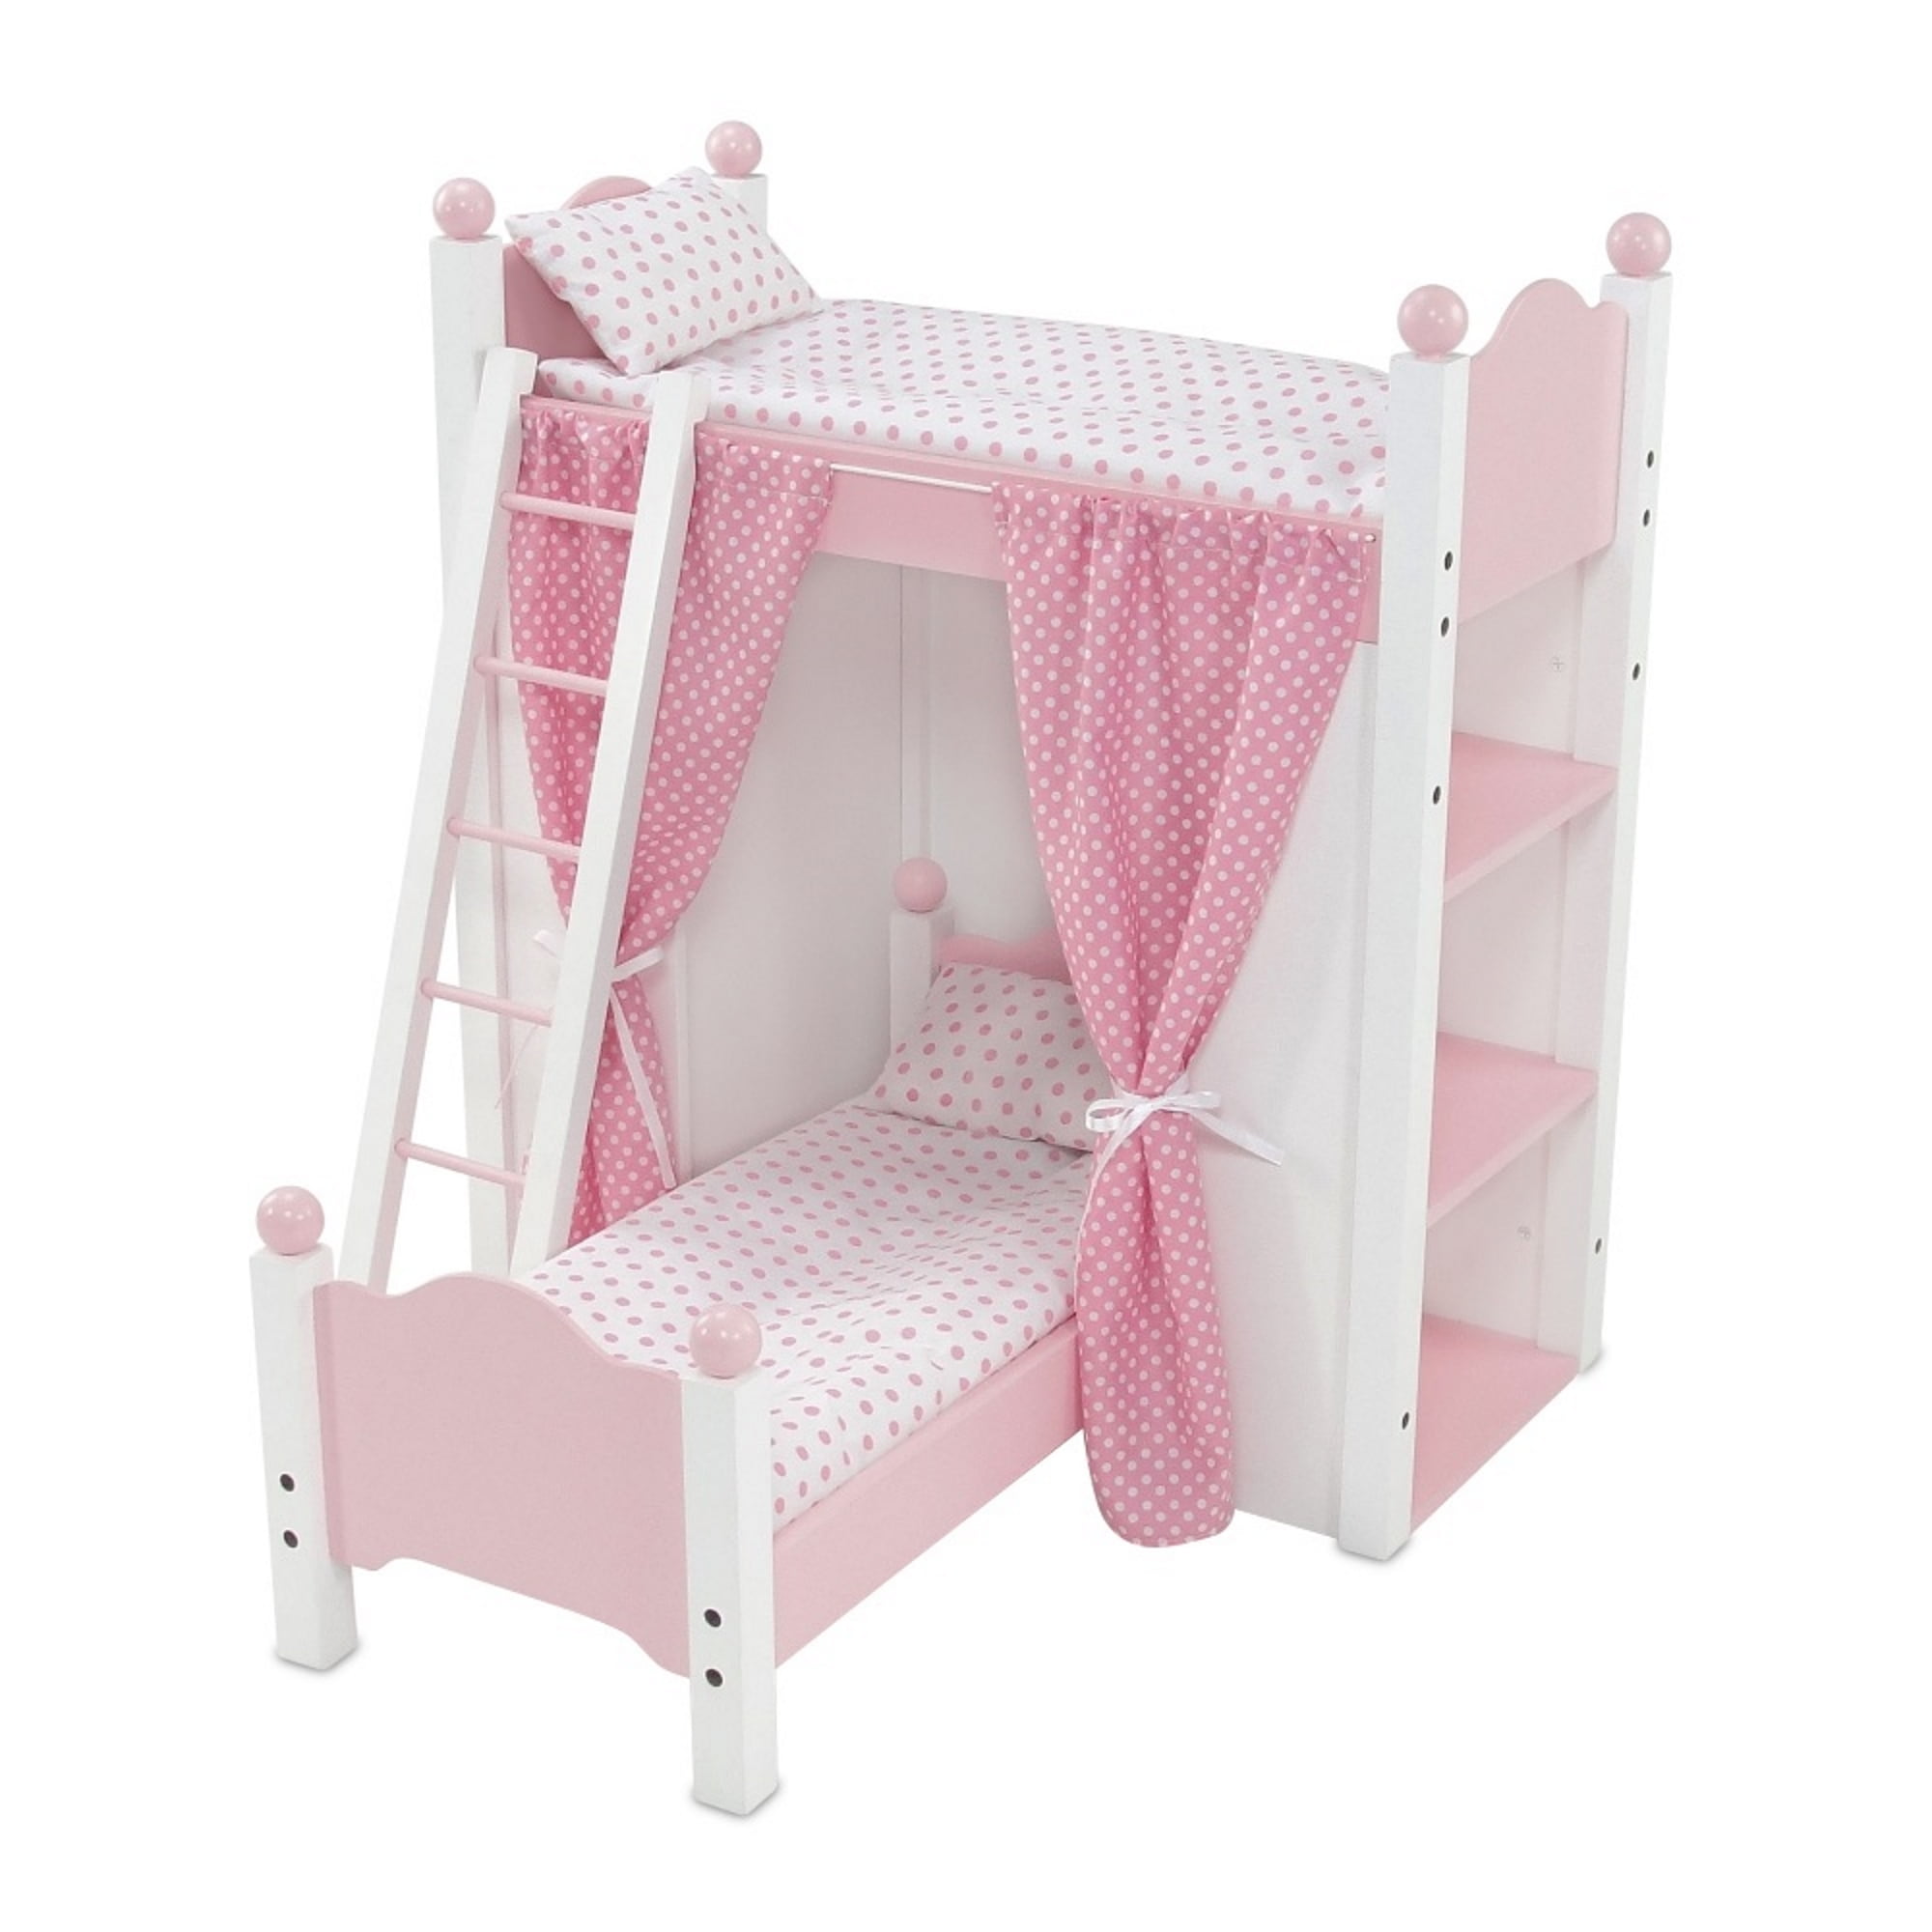 18 Inch Doll Furniture Bed For My Life As Dolls Doll Loft Bunk